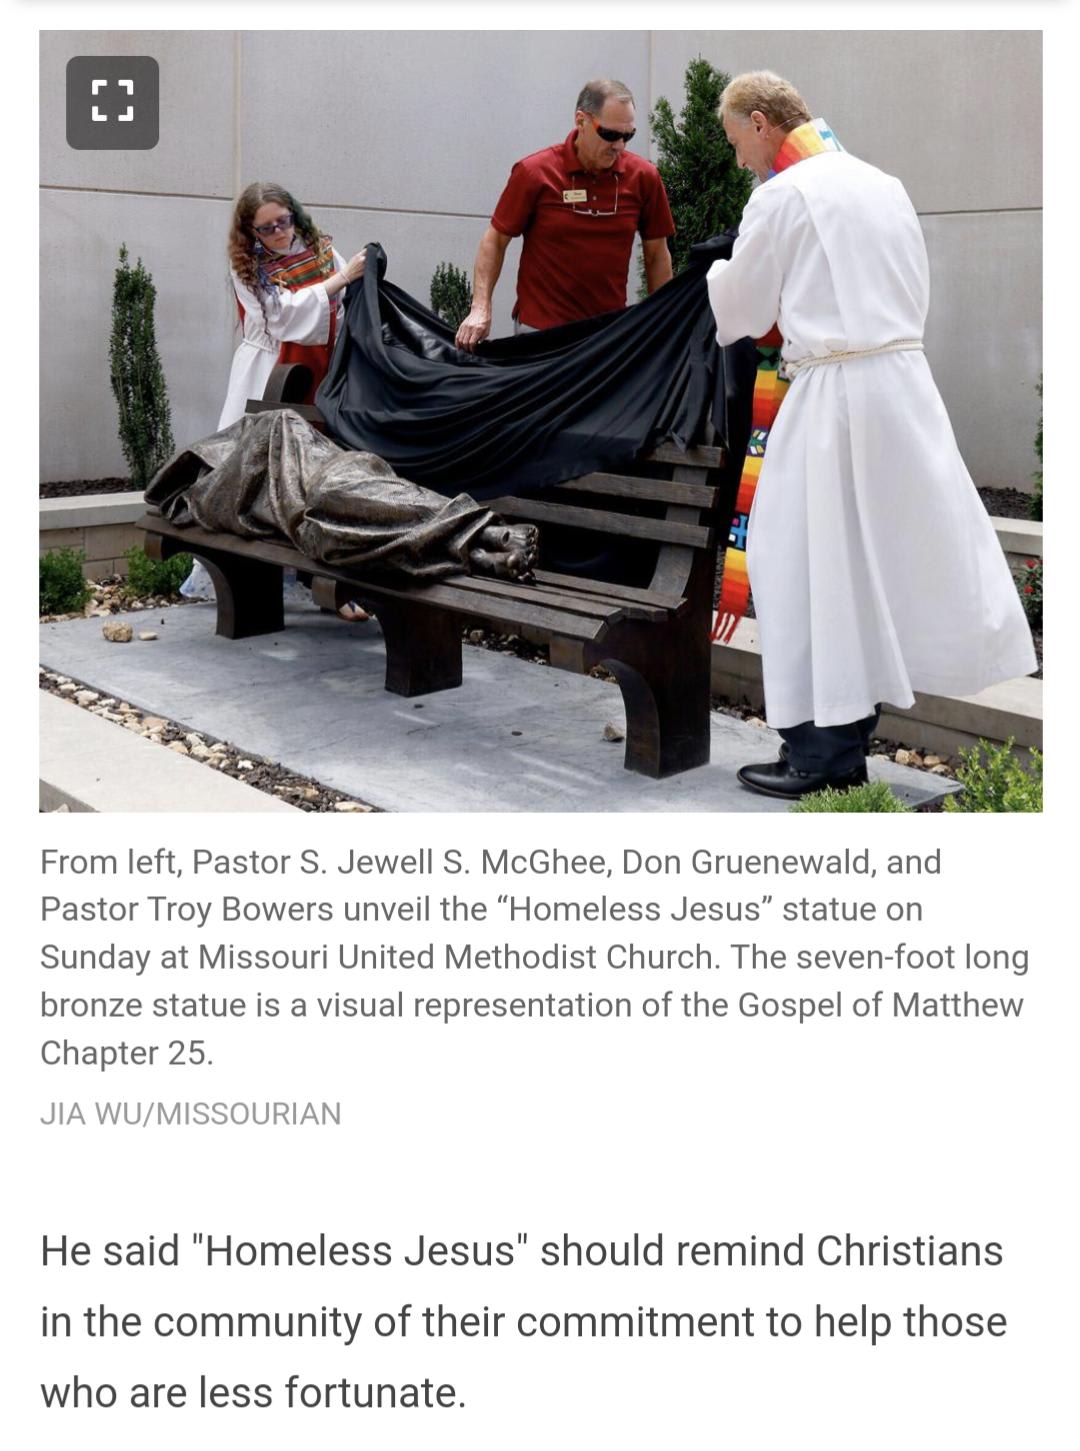 A methodist church in my town just unveiled "homeless Jesus"